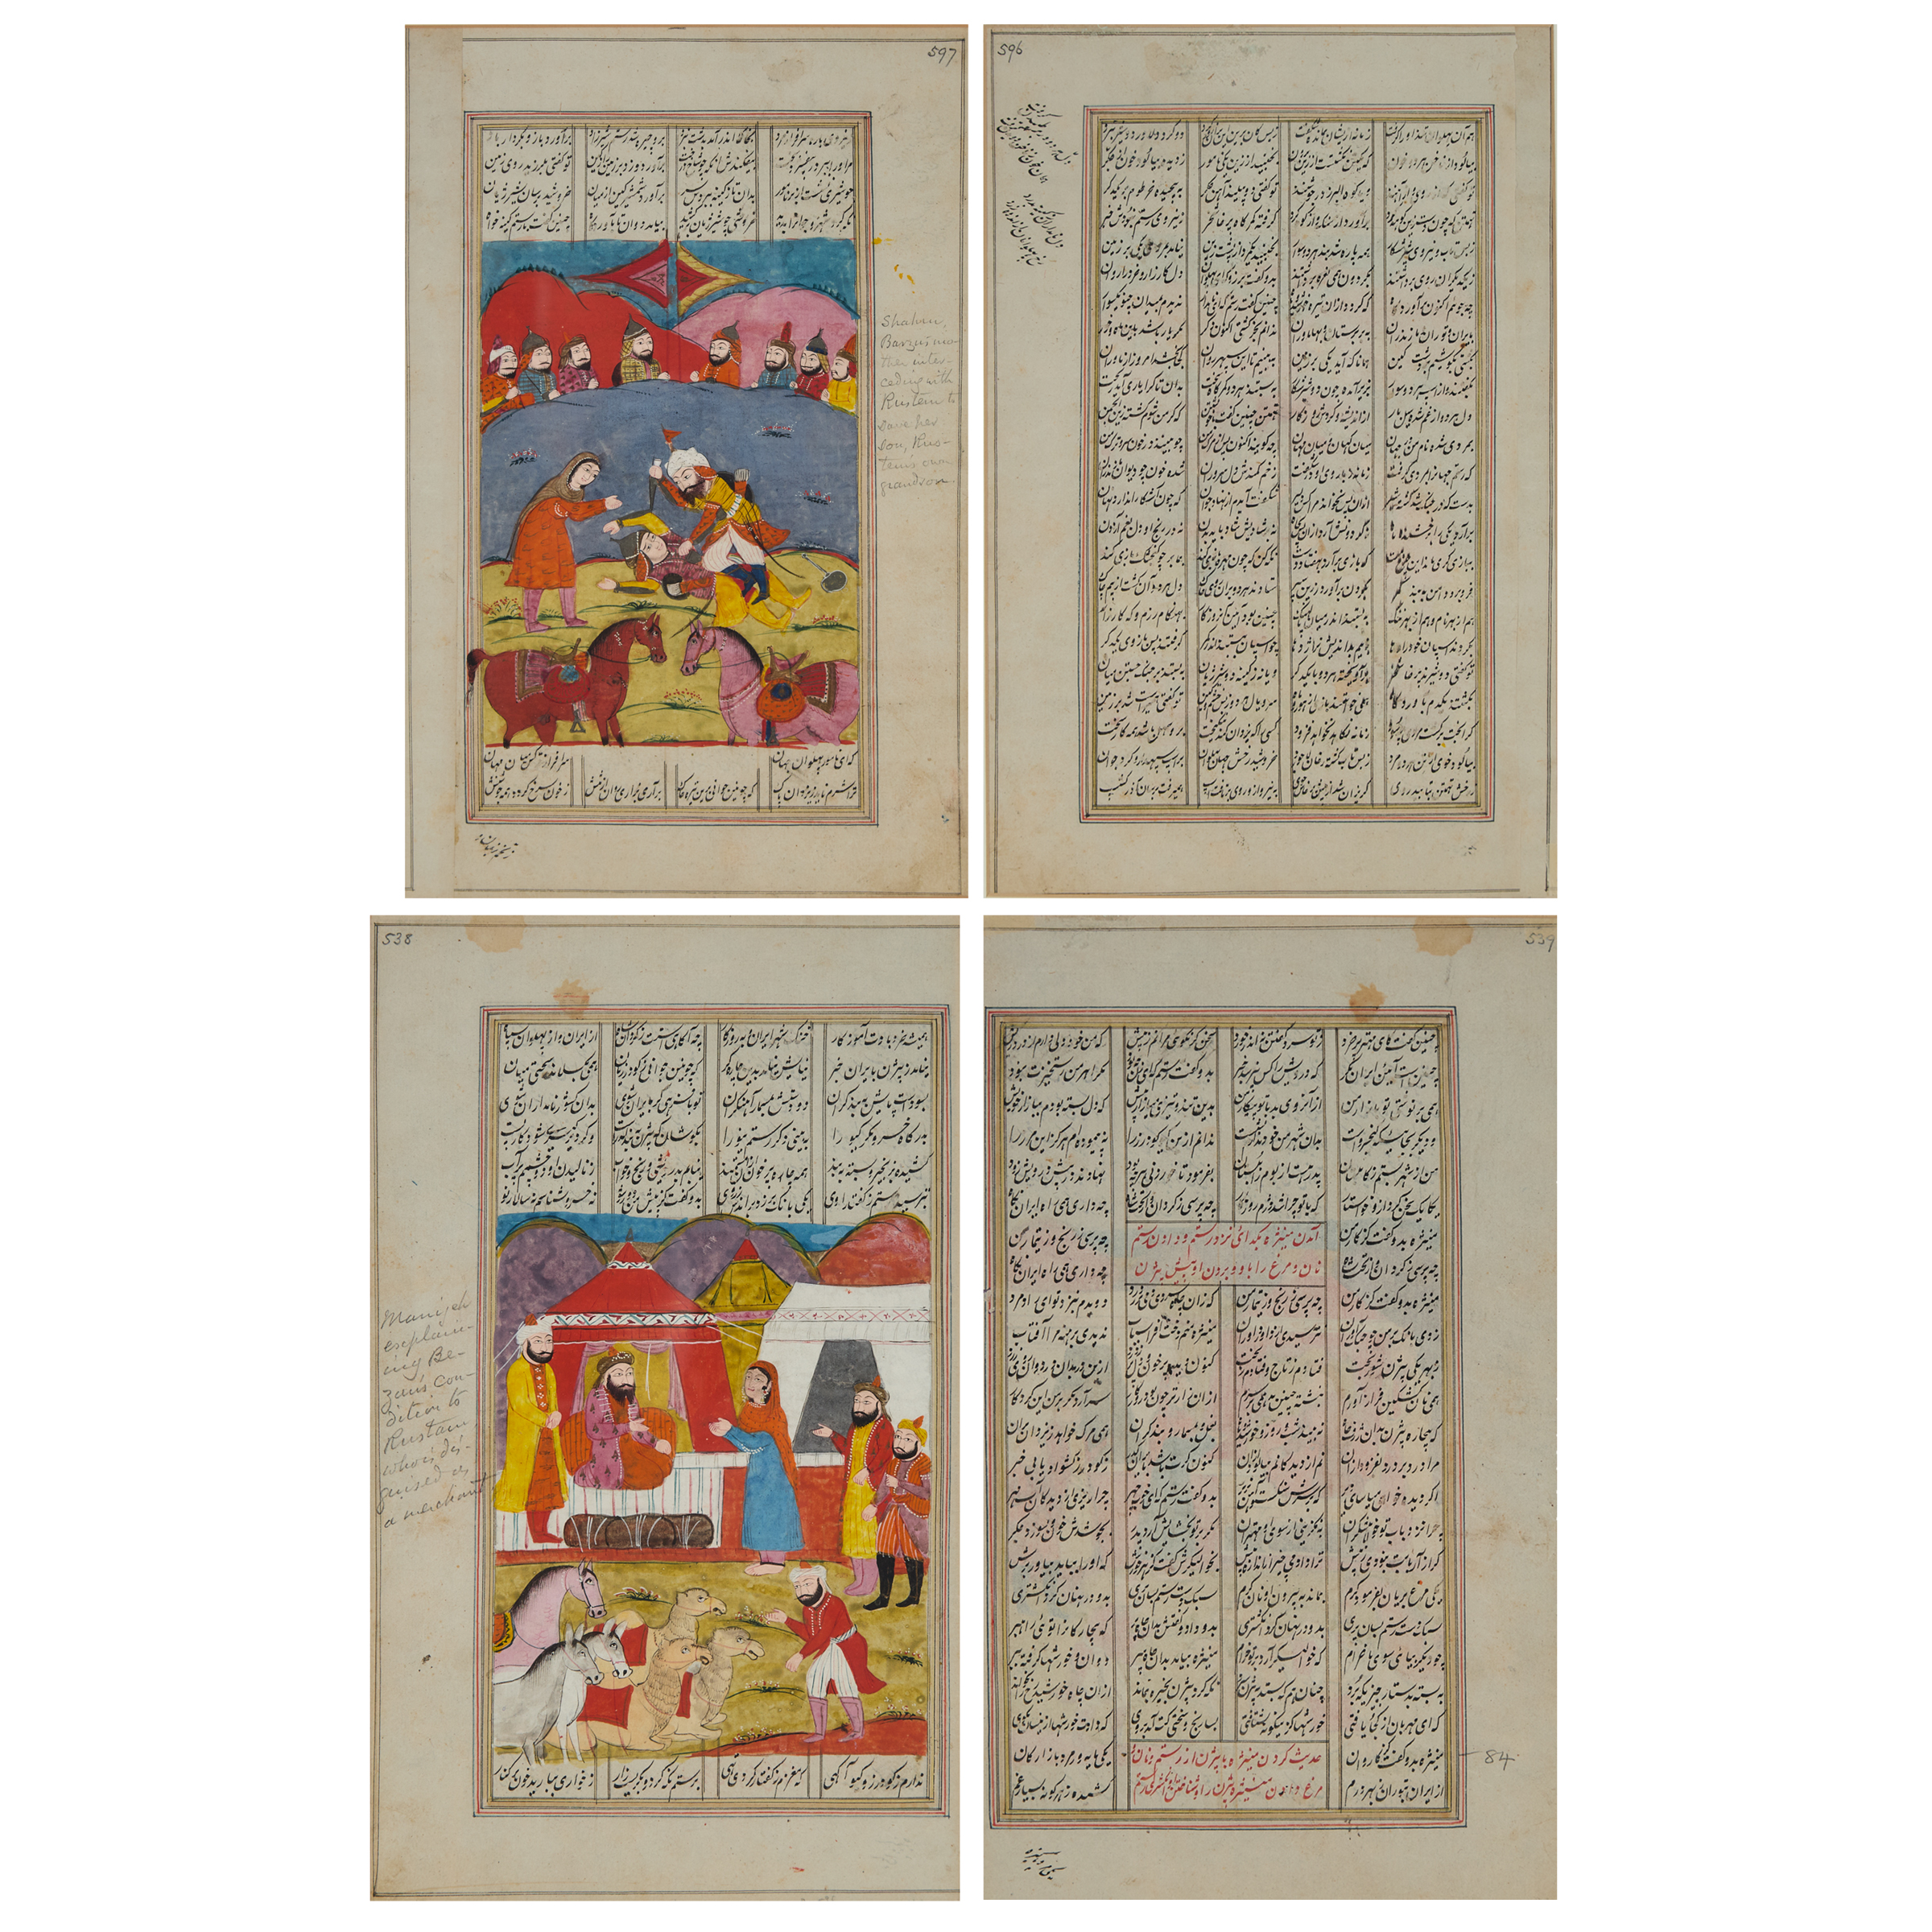 Two Illustrated Pages from the